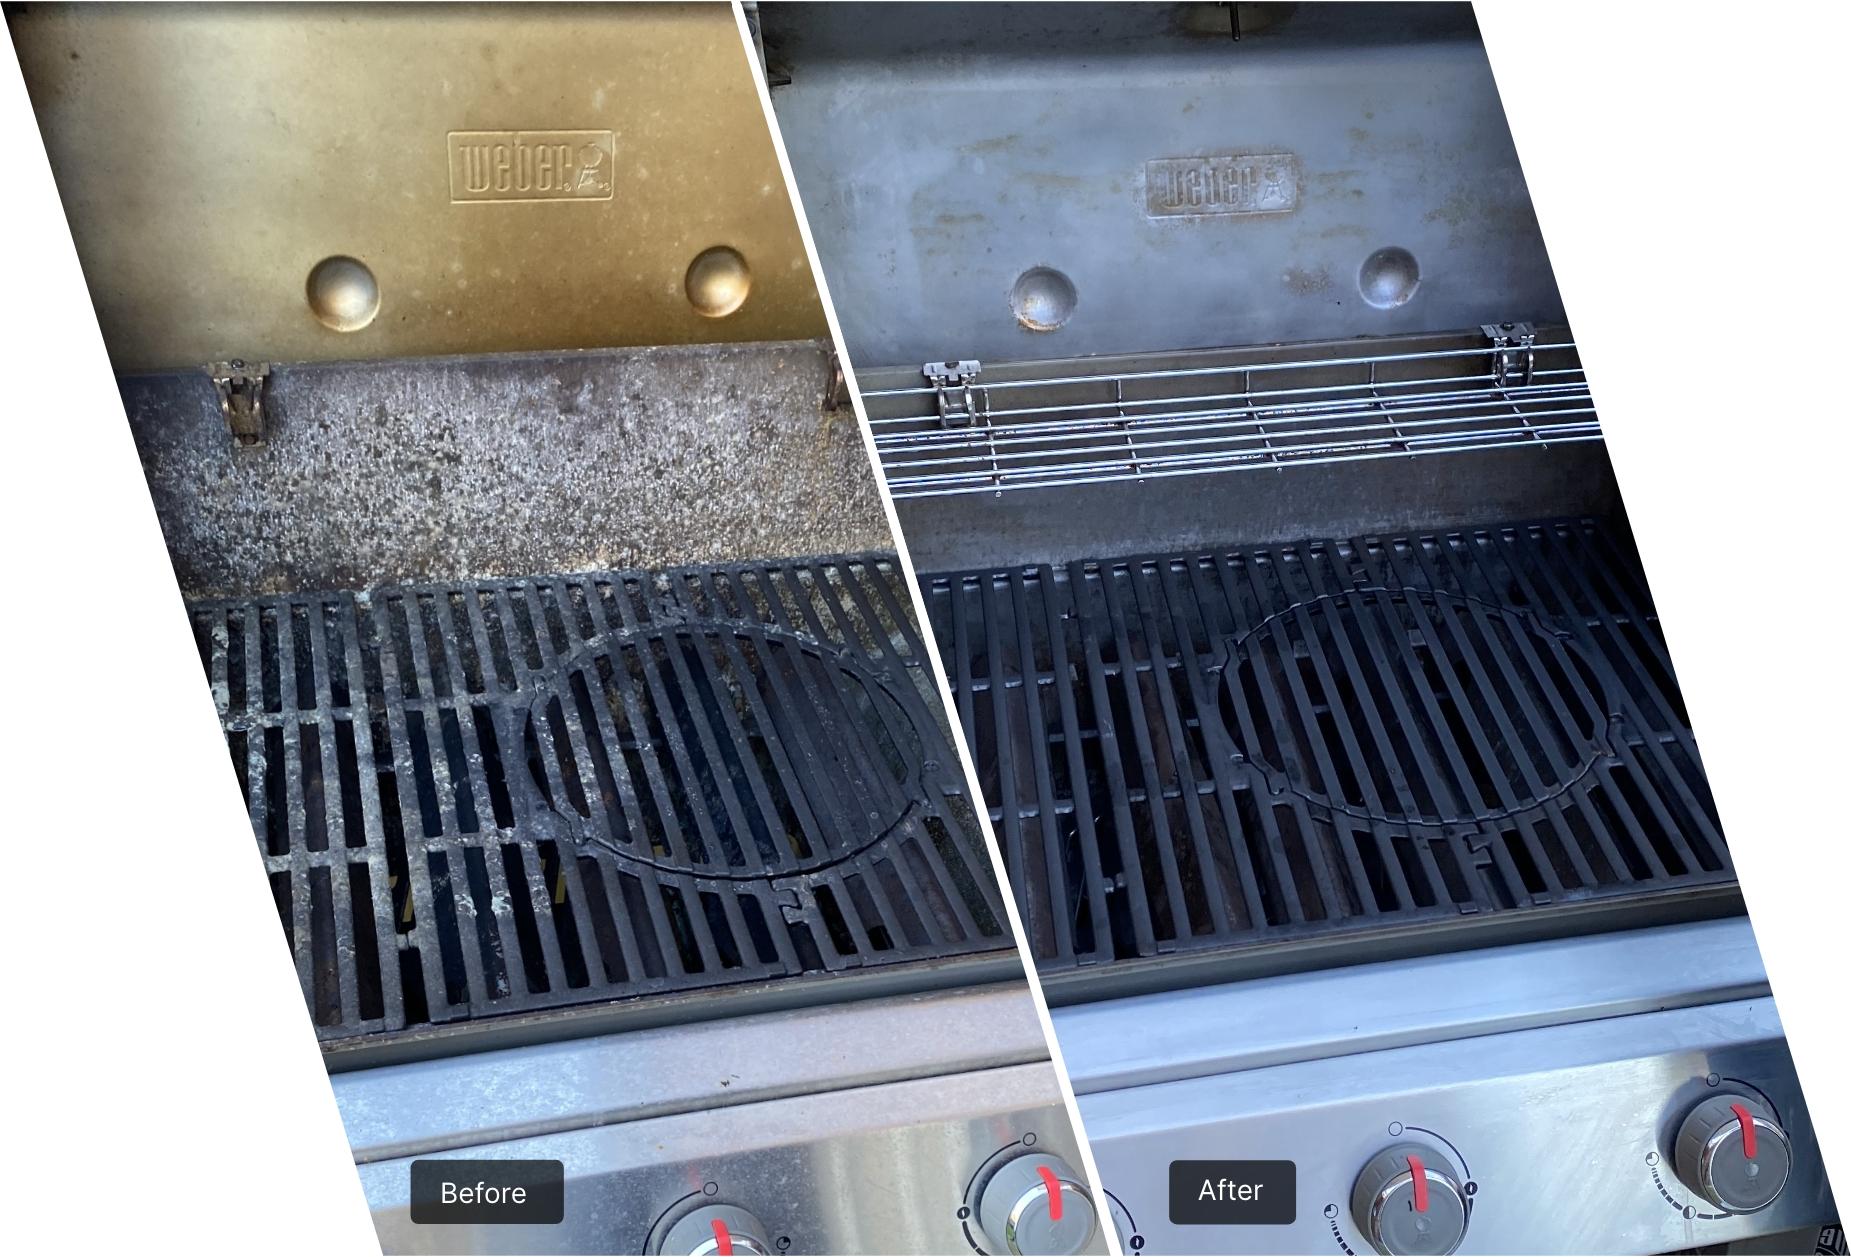 The image shows a side-by-side comparison of two photos showcasing a grill before and after professional cleaning.